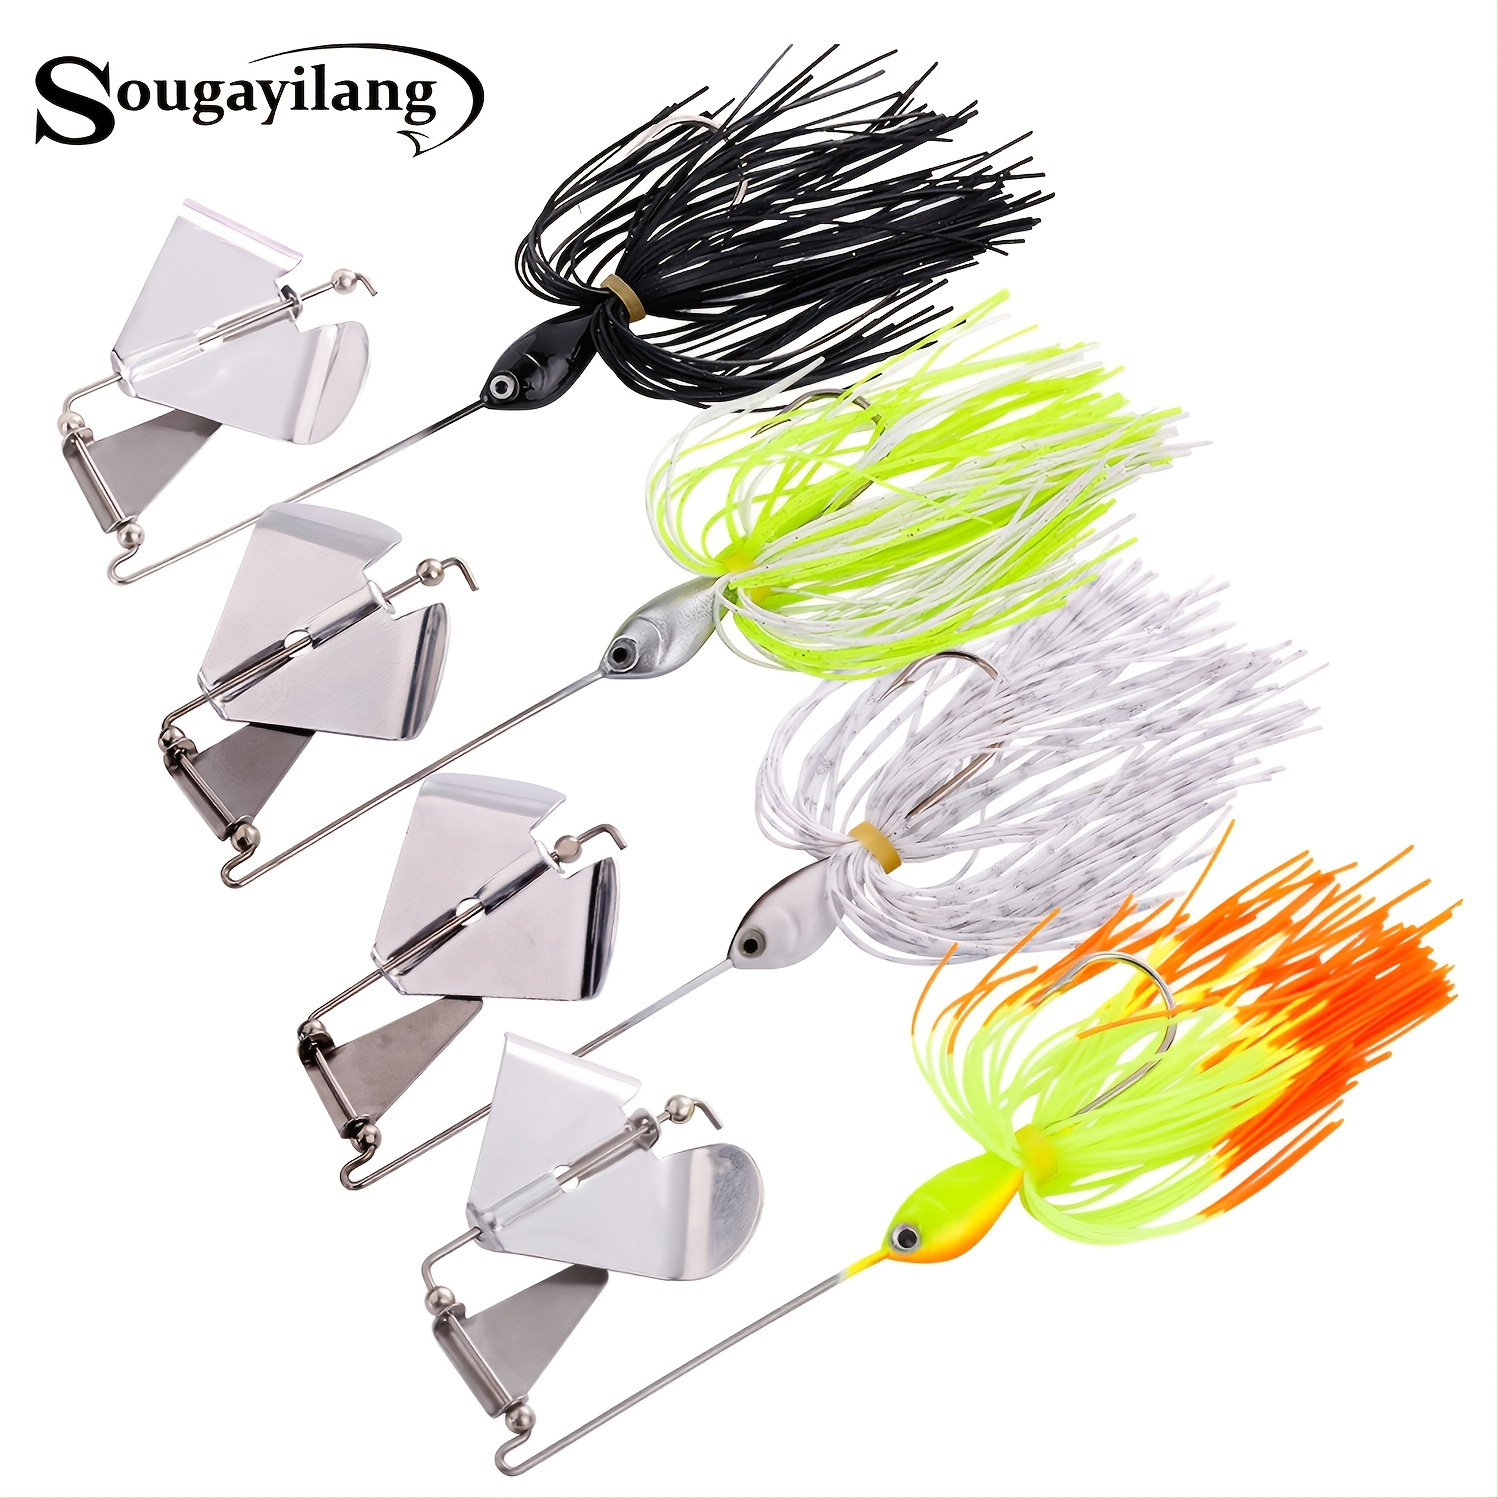 

1 Pcs Sougayilang Buzzbait Fishing Lures - Perfect For Catching Bass And Pike